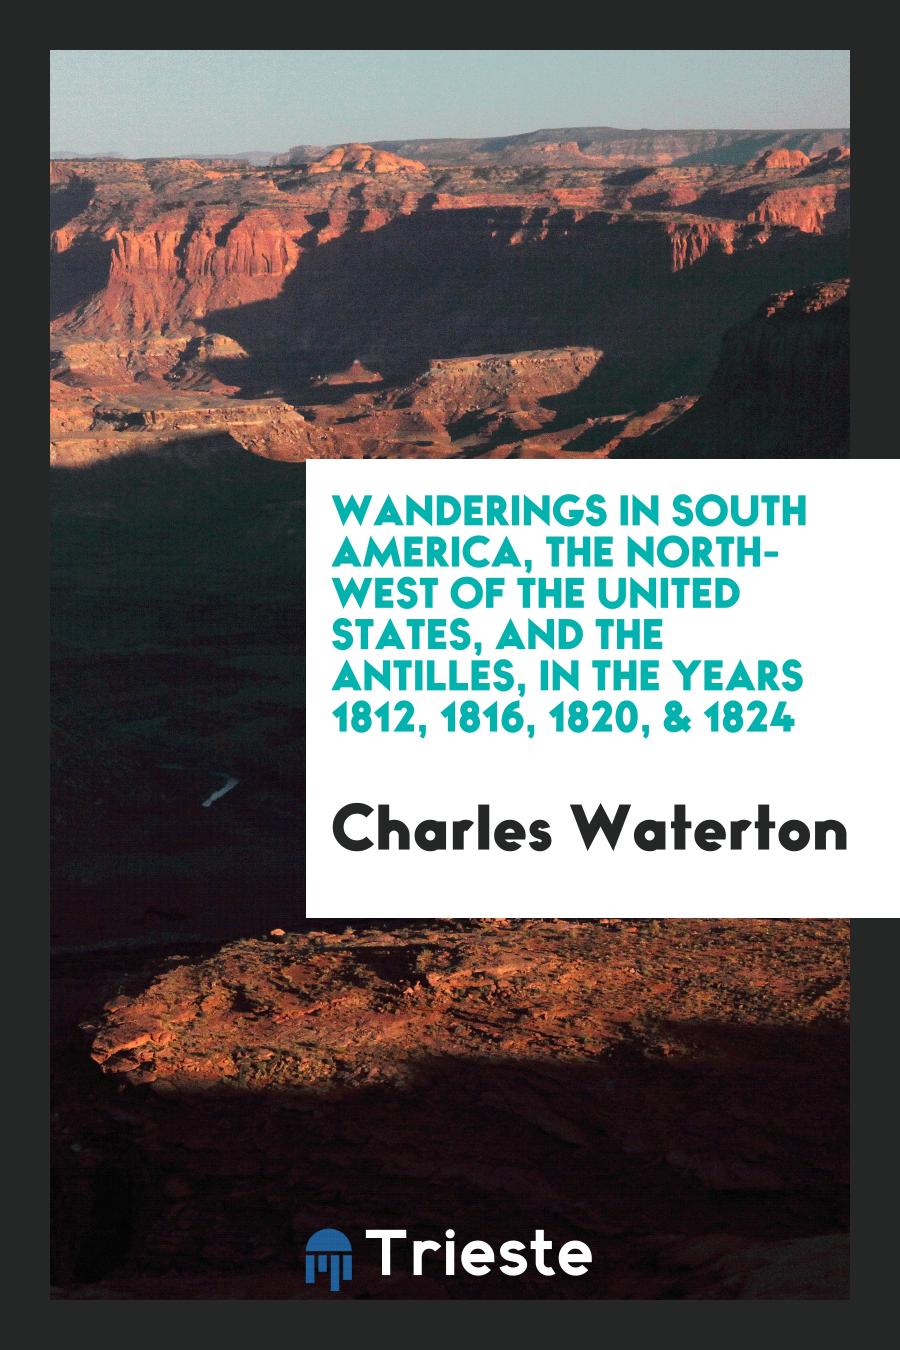 Wanderings in South America, the North-West of the United States, and the Antilles, in the Years 1812, 1816, 1820, & 1824